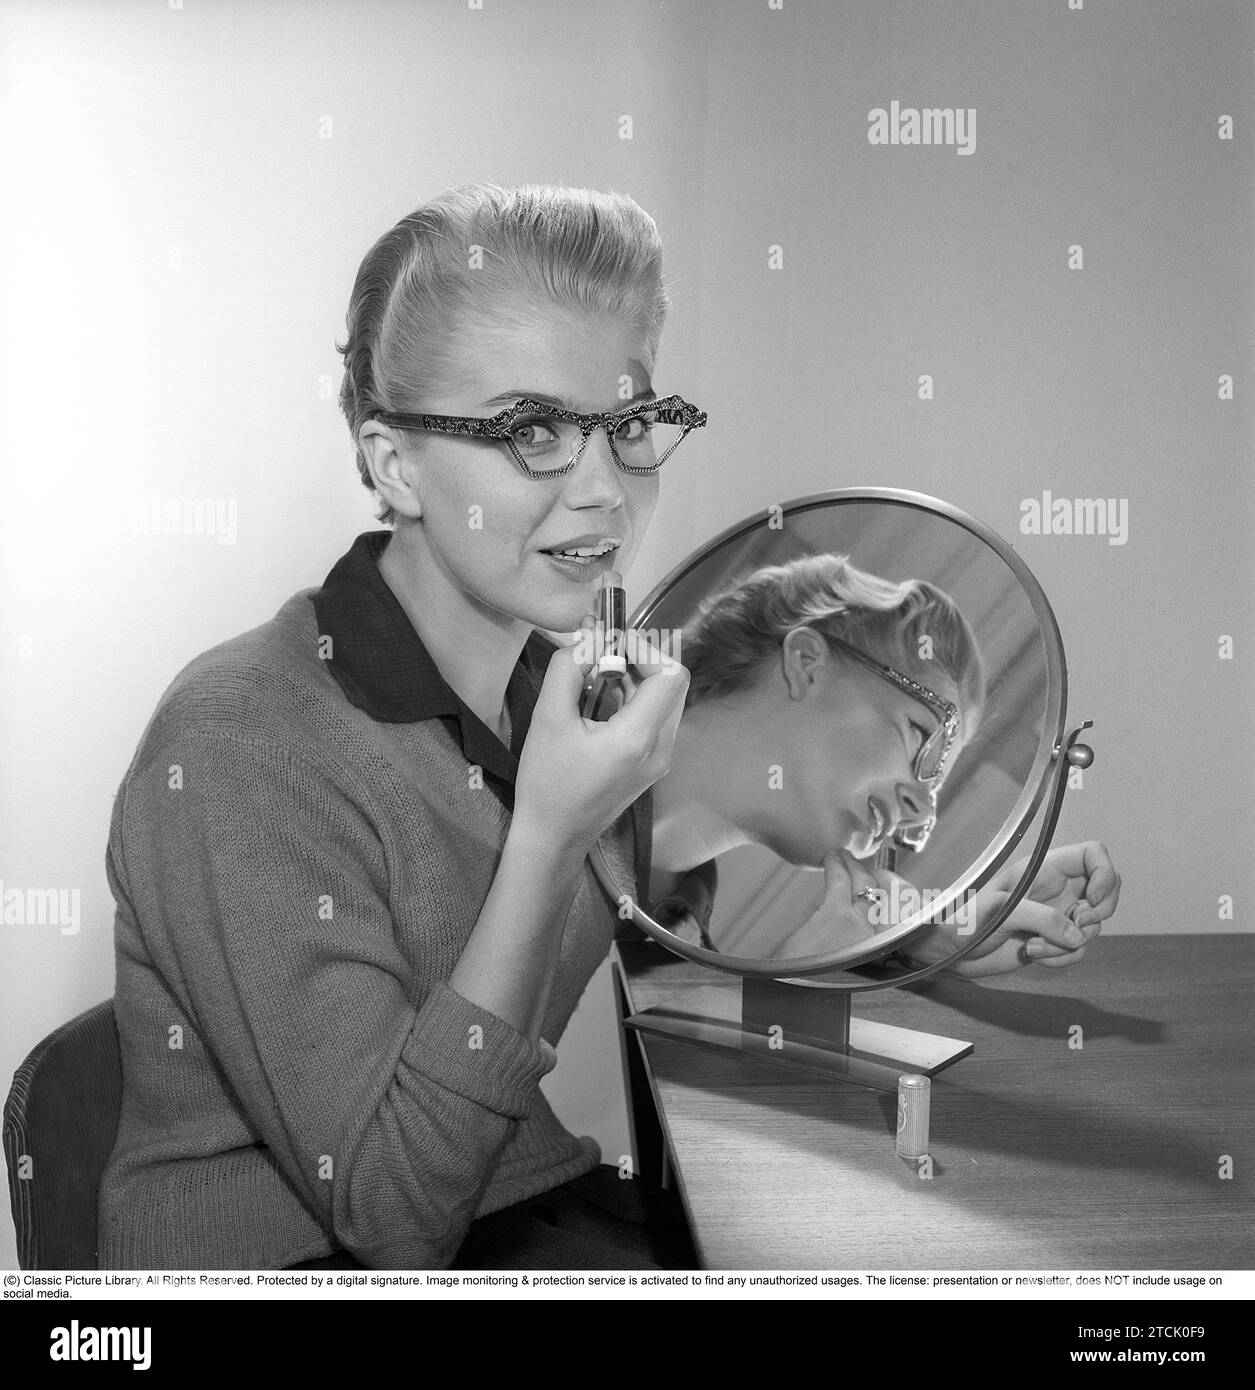 In the 1950s. A young woman with a mirror putting lipstick on. She has the glasses and bows typical of the 1950s. 1958. Kristoffersson ref CB99-12 Stock Photo